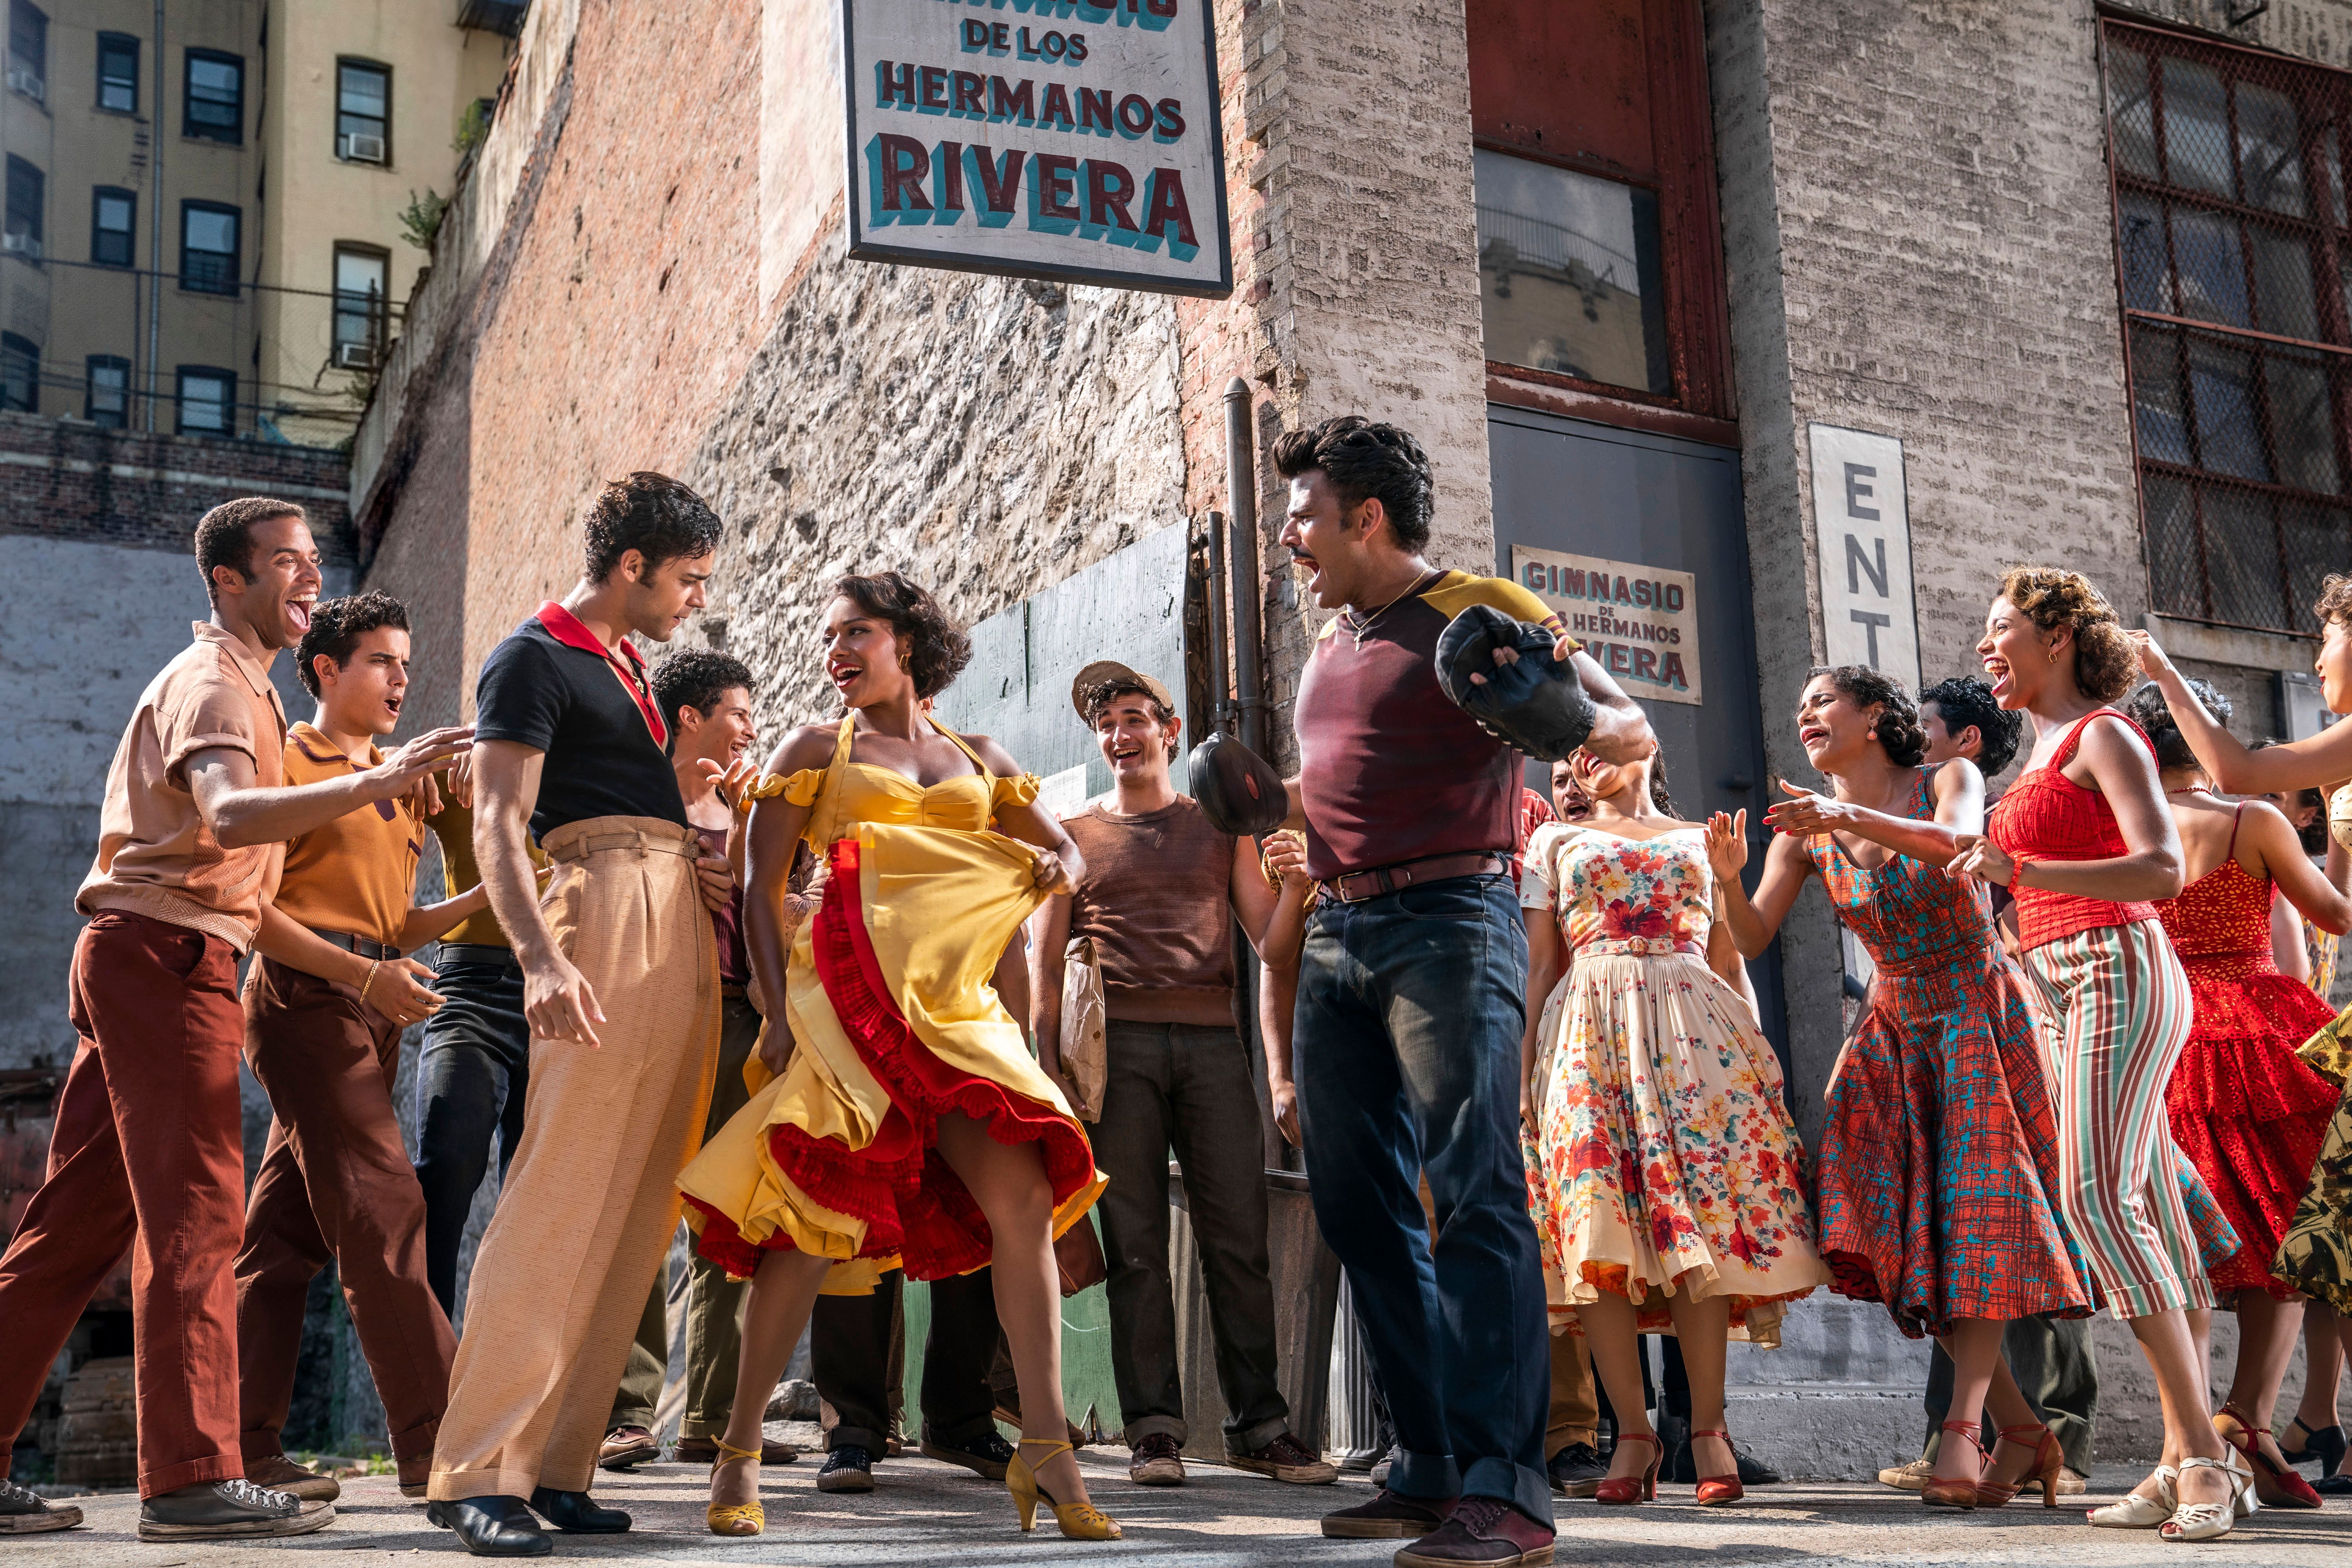 west side story 2021 movie image-1